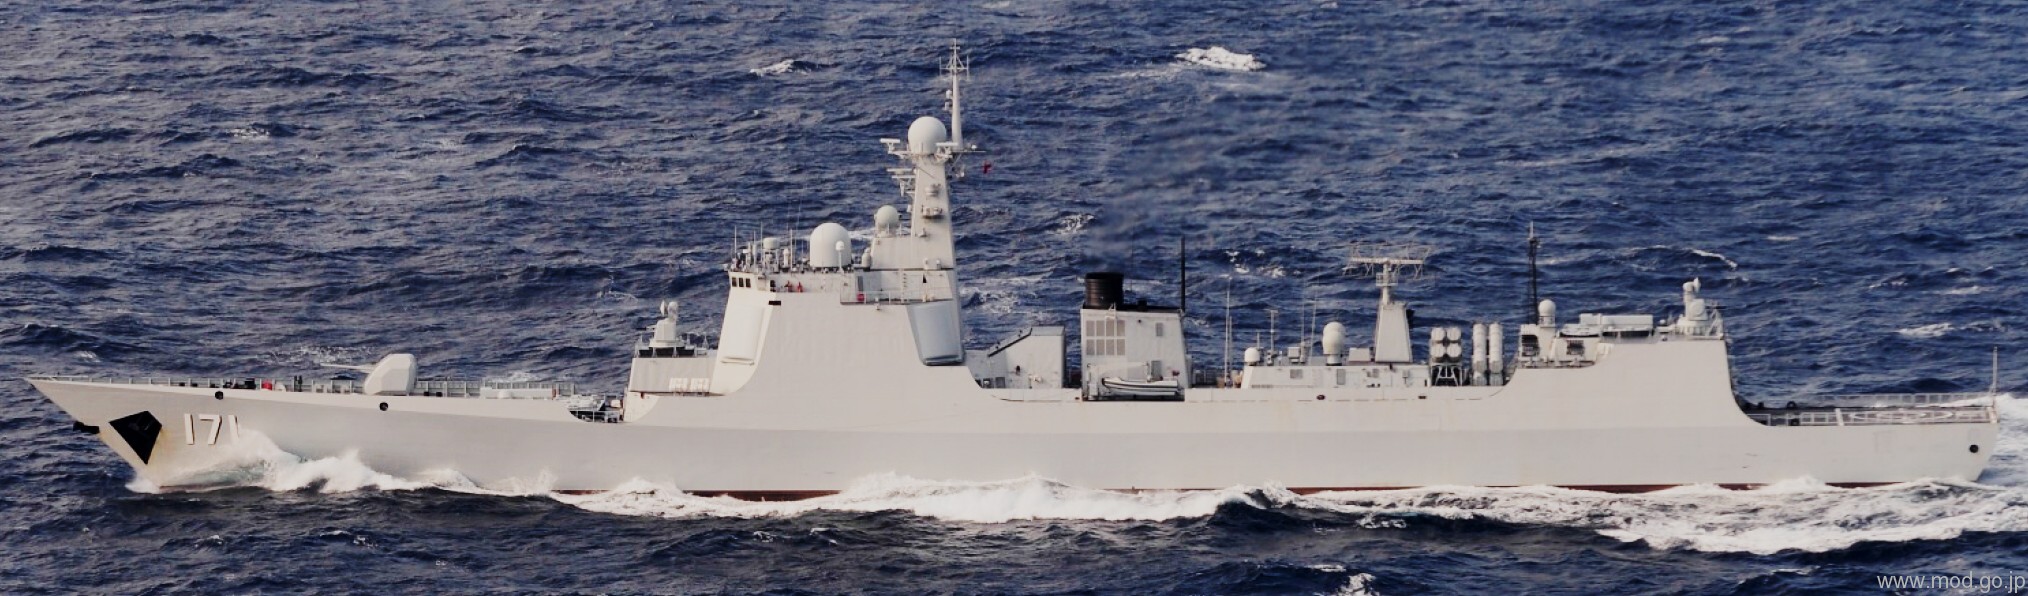 ddg-171 plans haikou type 052c class guided missile destroyer china people's liberation army navy 02